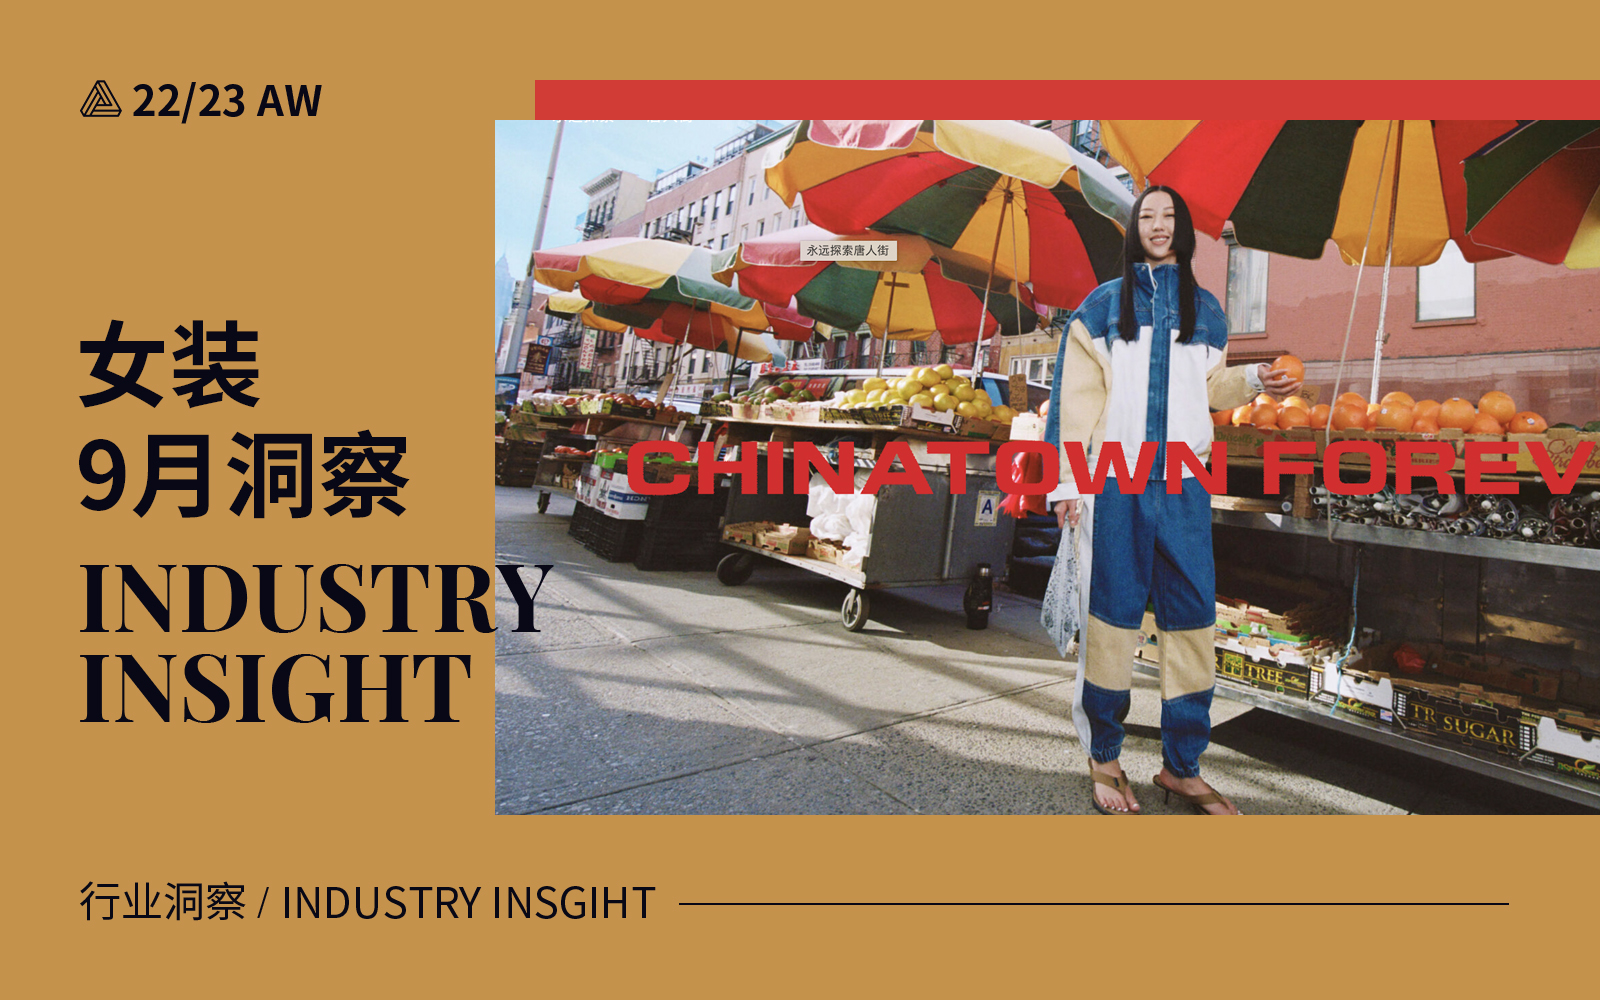 September 2022 -- The Industry Insight of Womenswear